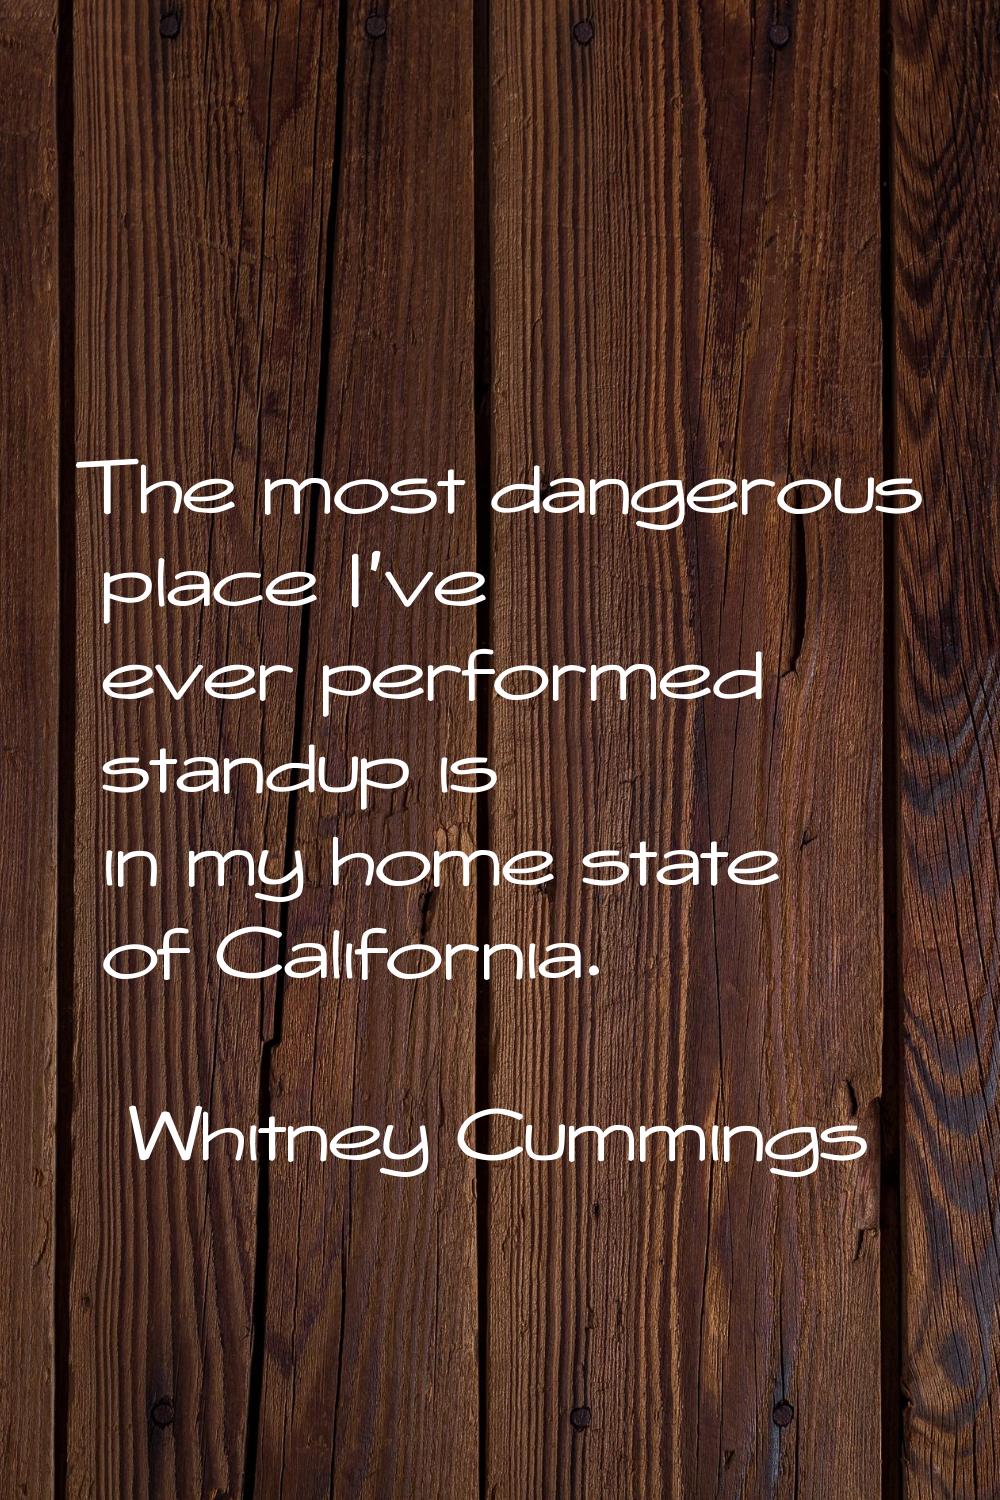 The most dangerous place I've ever performed standup is in my home state of California.